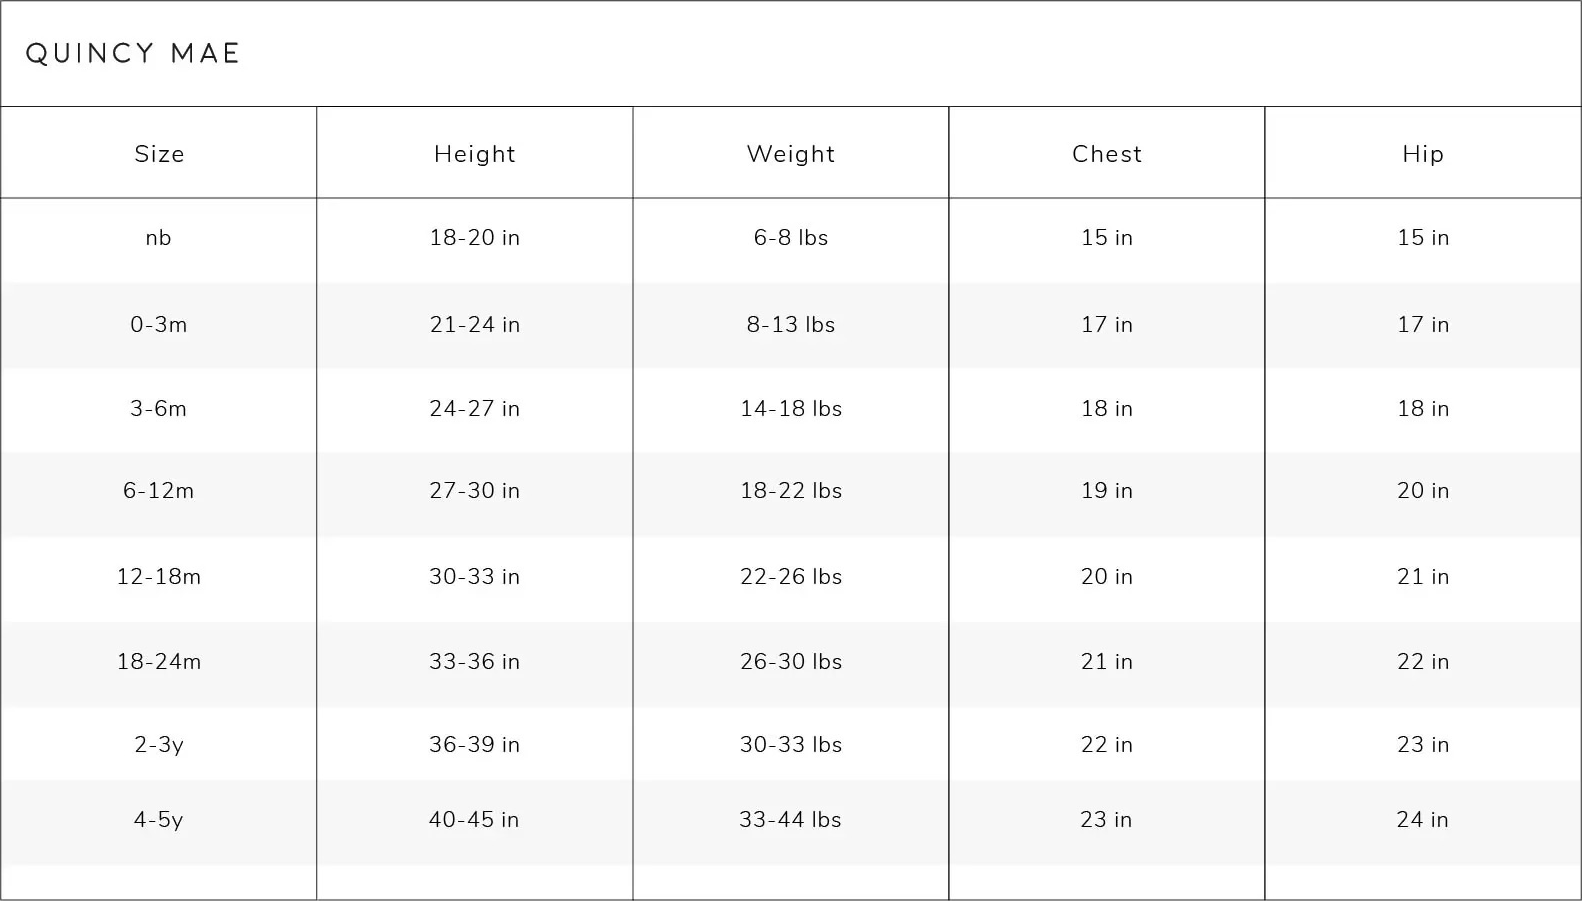 Quincy Mae Sizing Guide